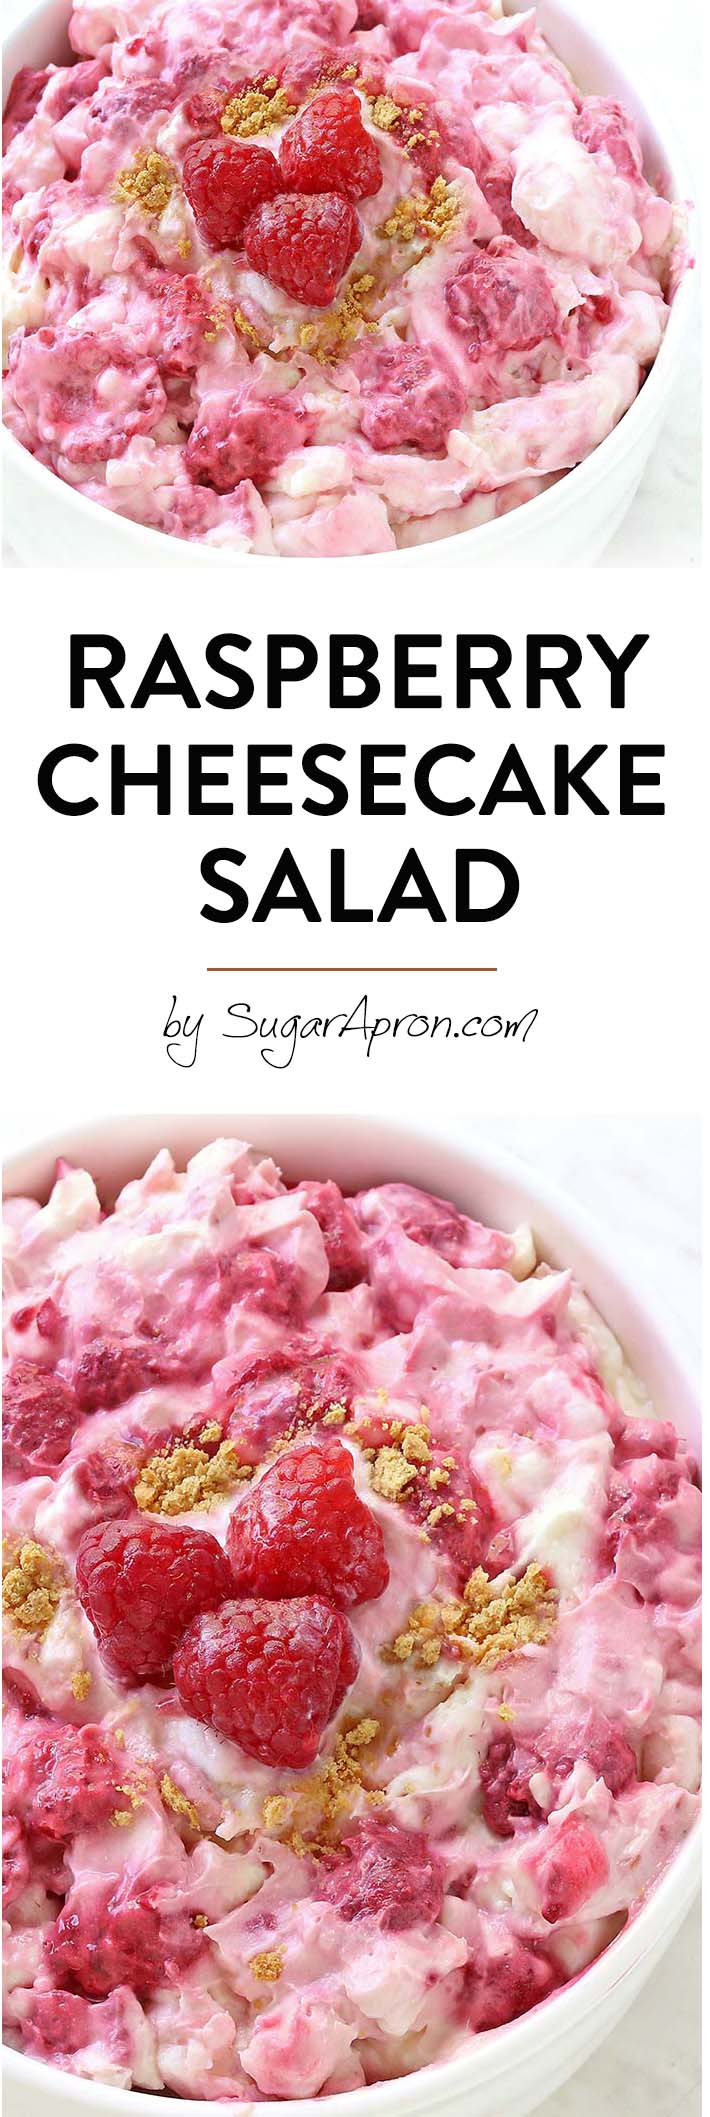 This isn’t any old Fluff Salad recipe – it’s a Raspberry Cheesecake Salad! This easy no-bake dessert salad is full of raspberries and graham crackers and is the perfect alternative to traditional fluff salad.